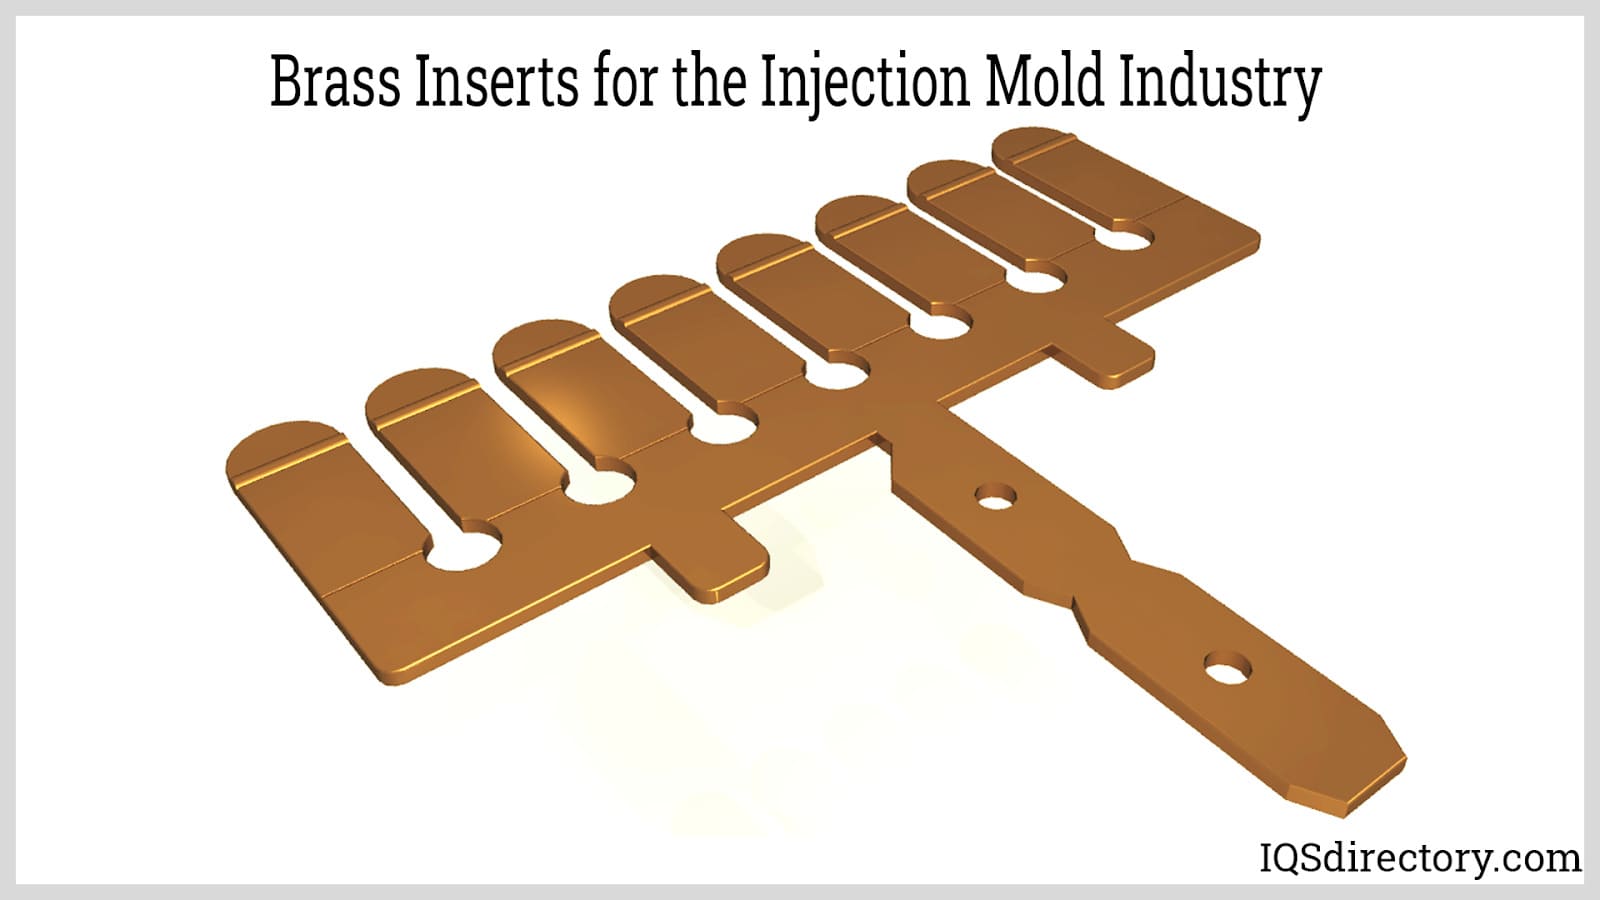 Brass Inserts for the Injection Mold Industry